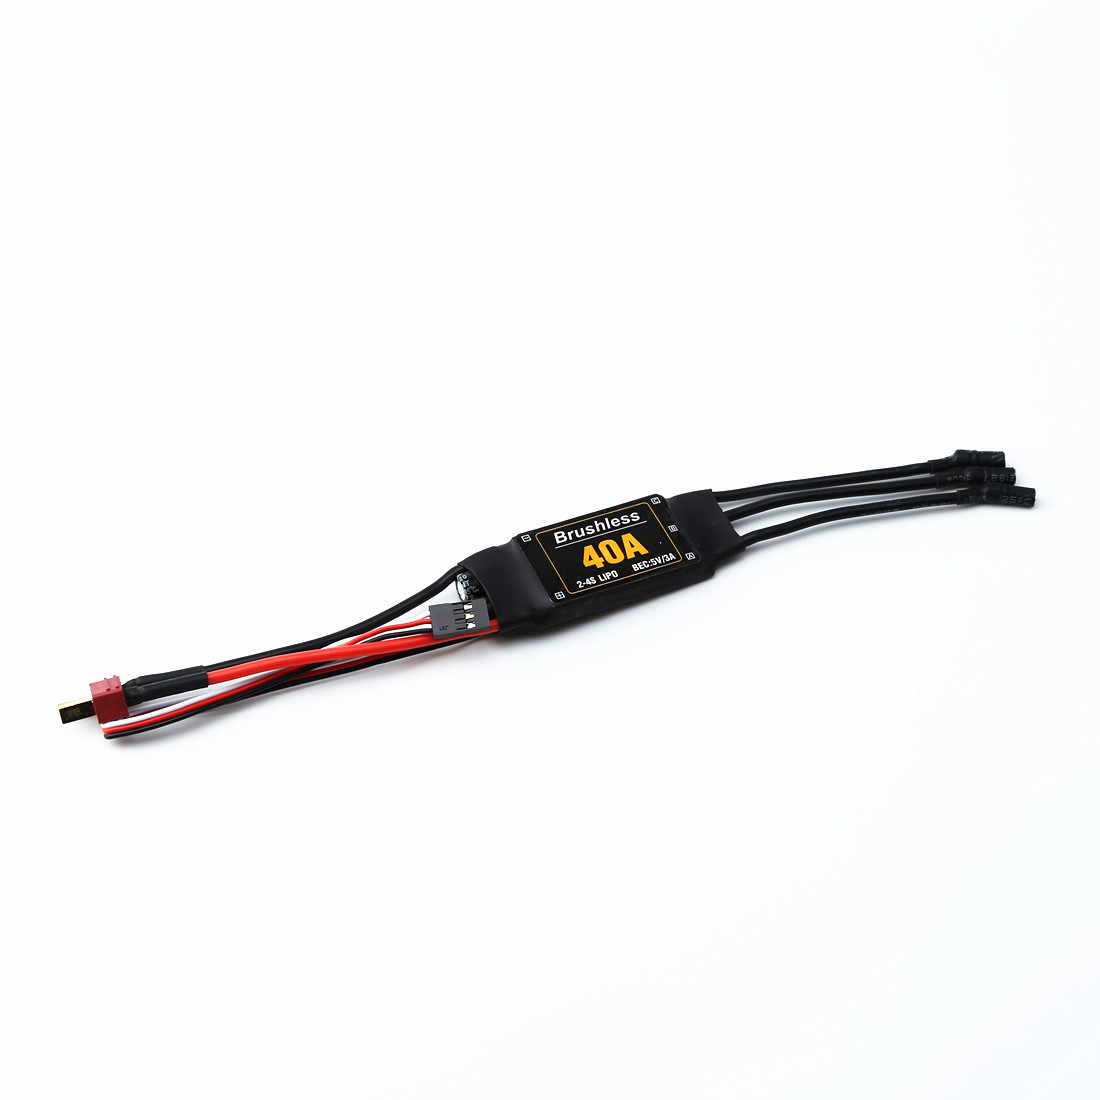 Brushless ESC for Drones and Helicopters